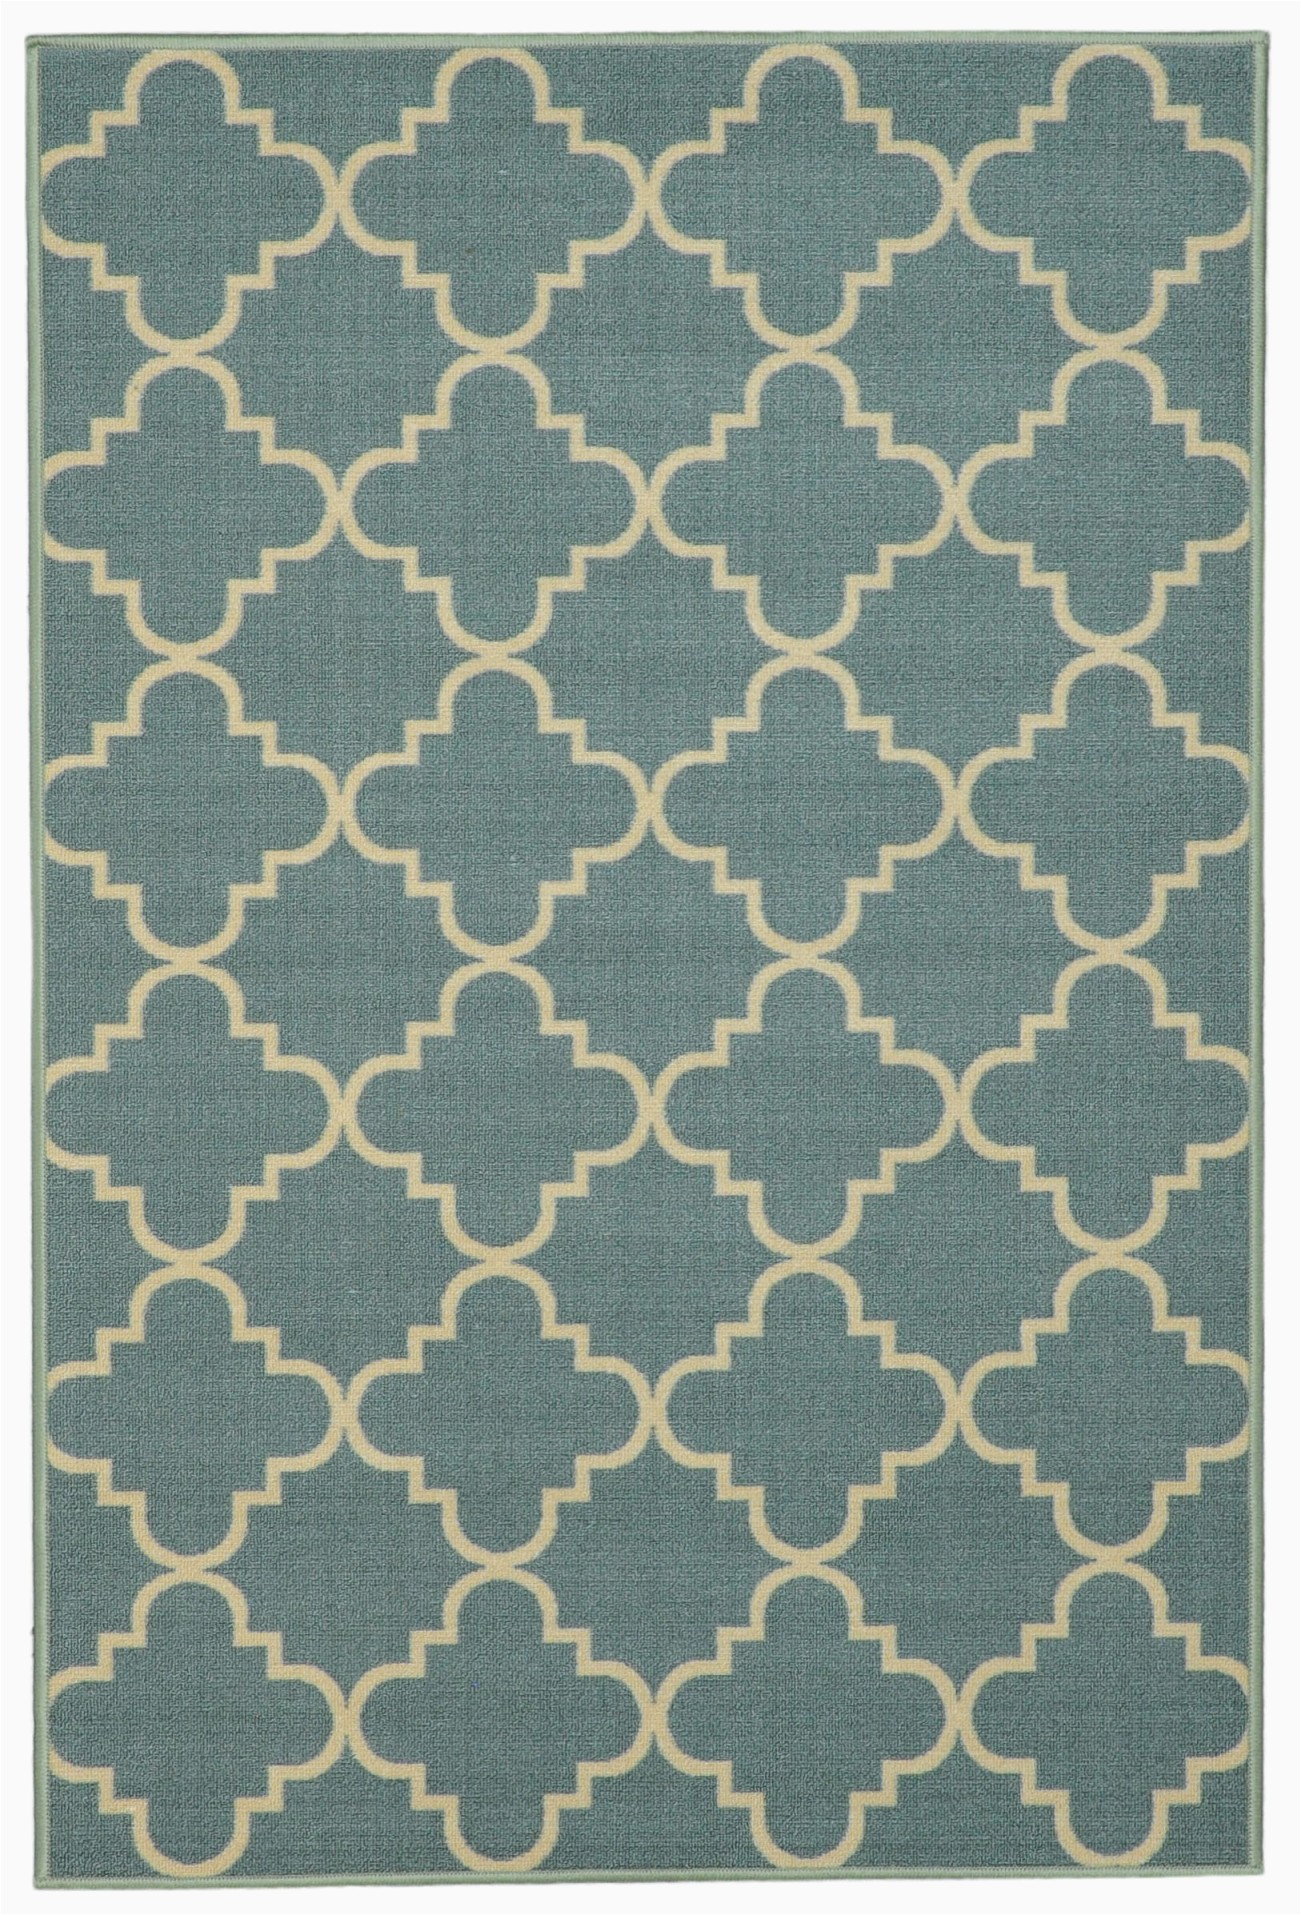 Rubber Backed 3×5 area Rugs Anti Bacterial Rubber Back area Rugs Non Skid Slip 5×7 Floor Rug